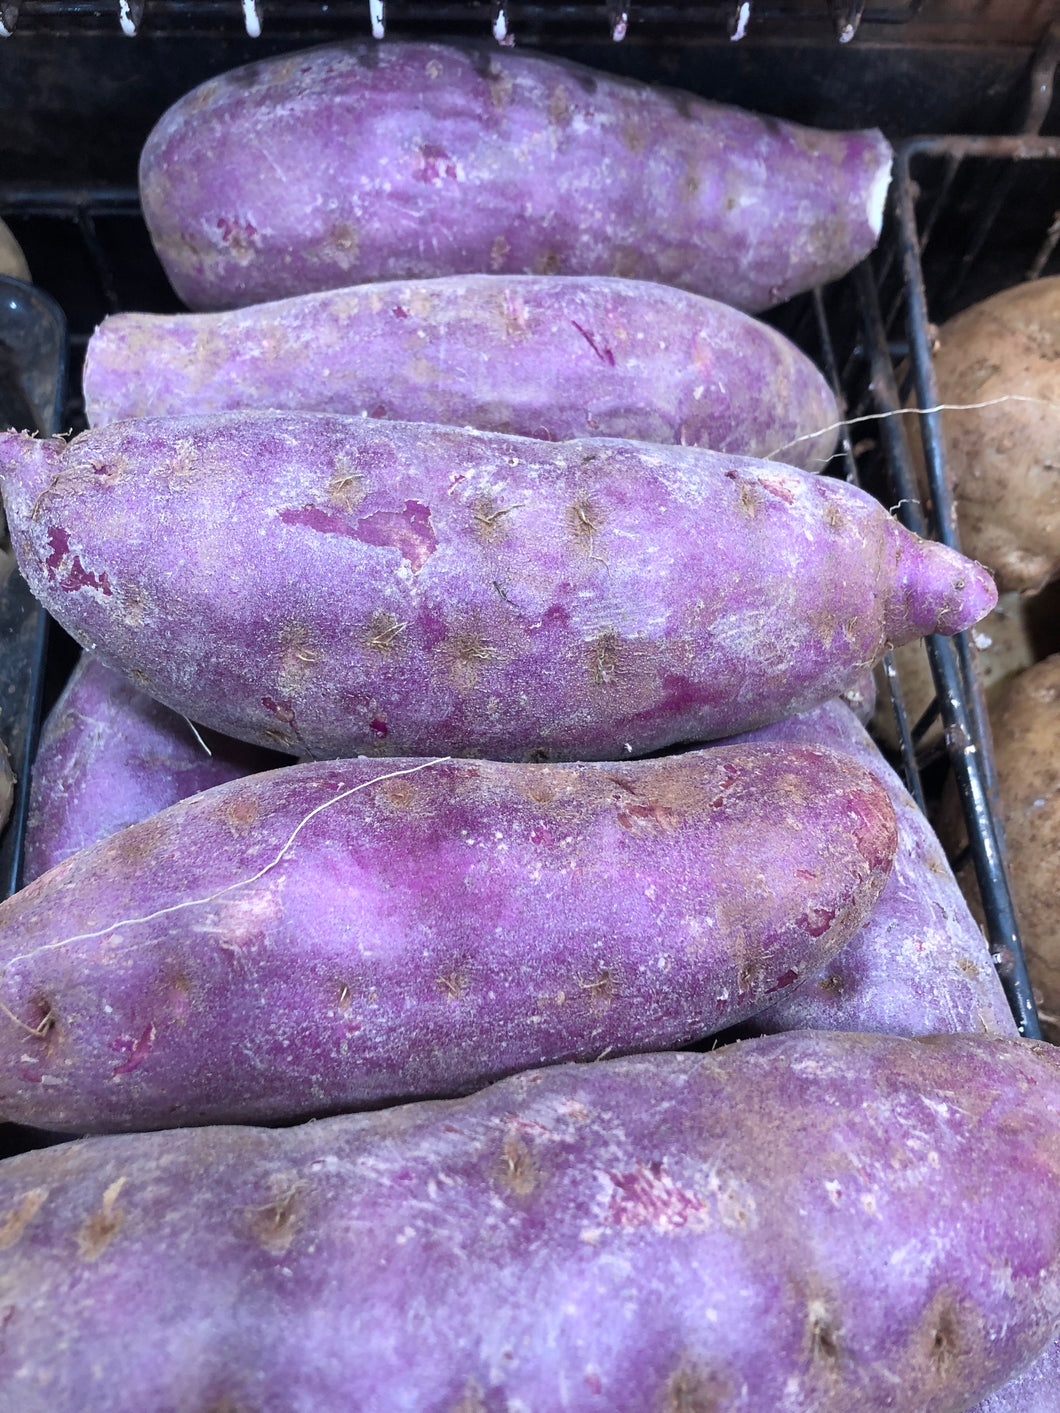 What Are Purple Sweet Potatoes—And How Do You Use Them?